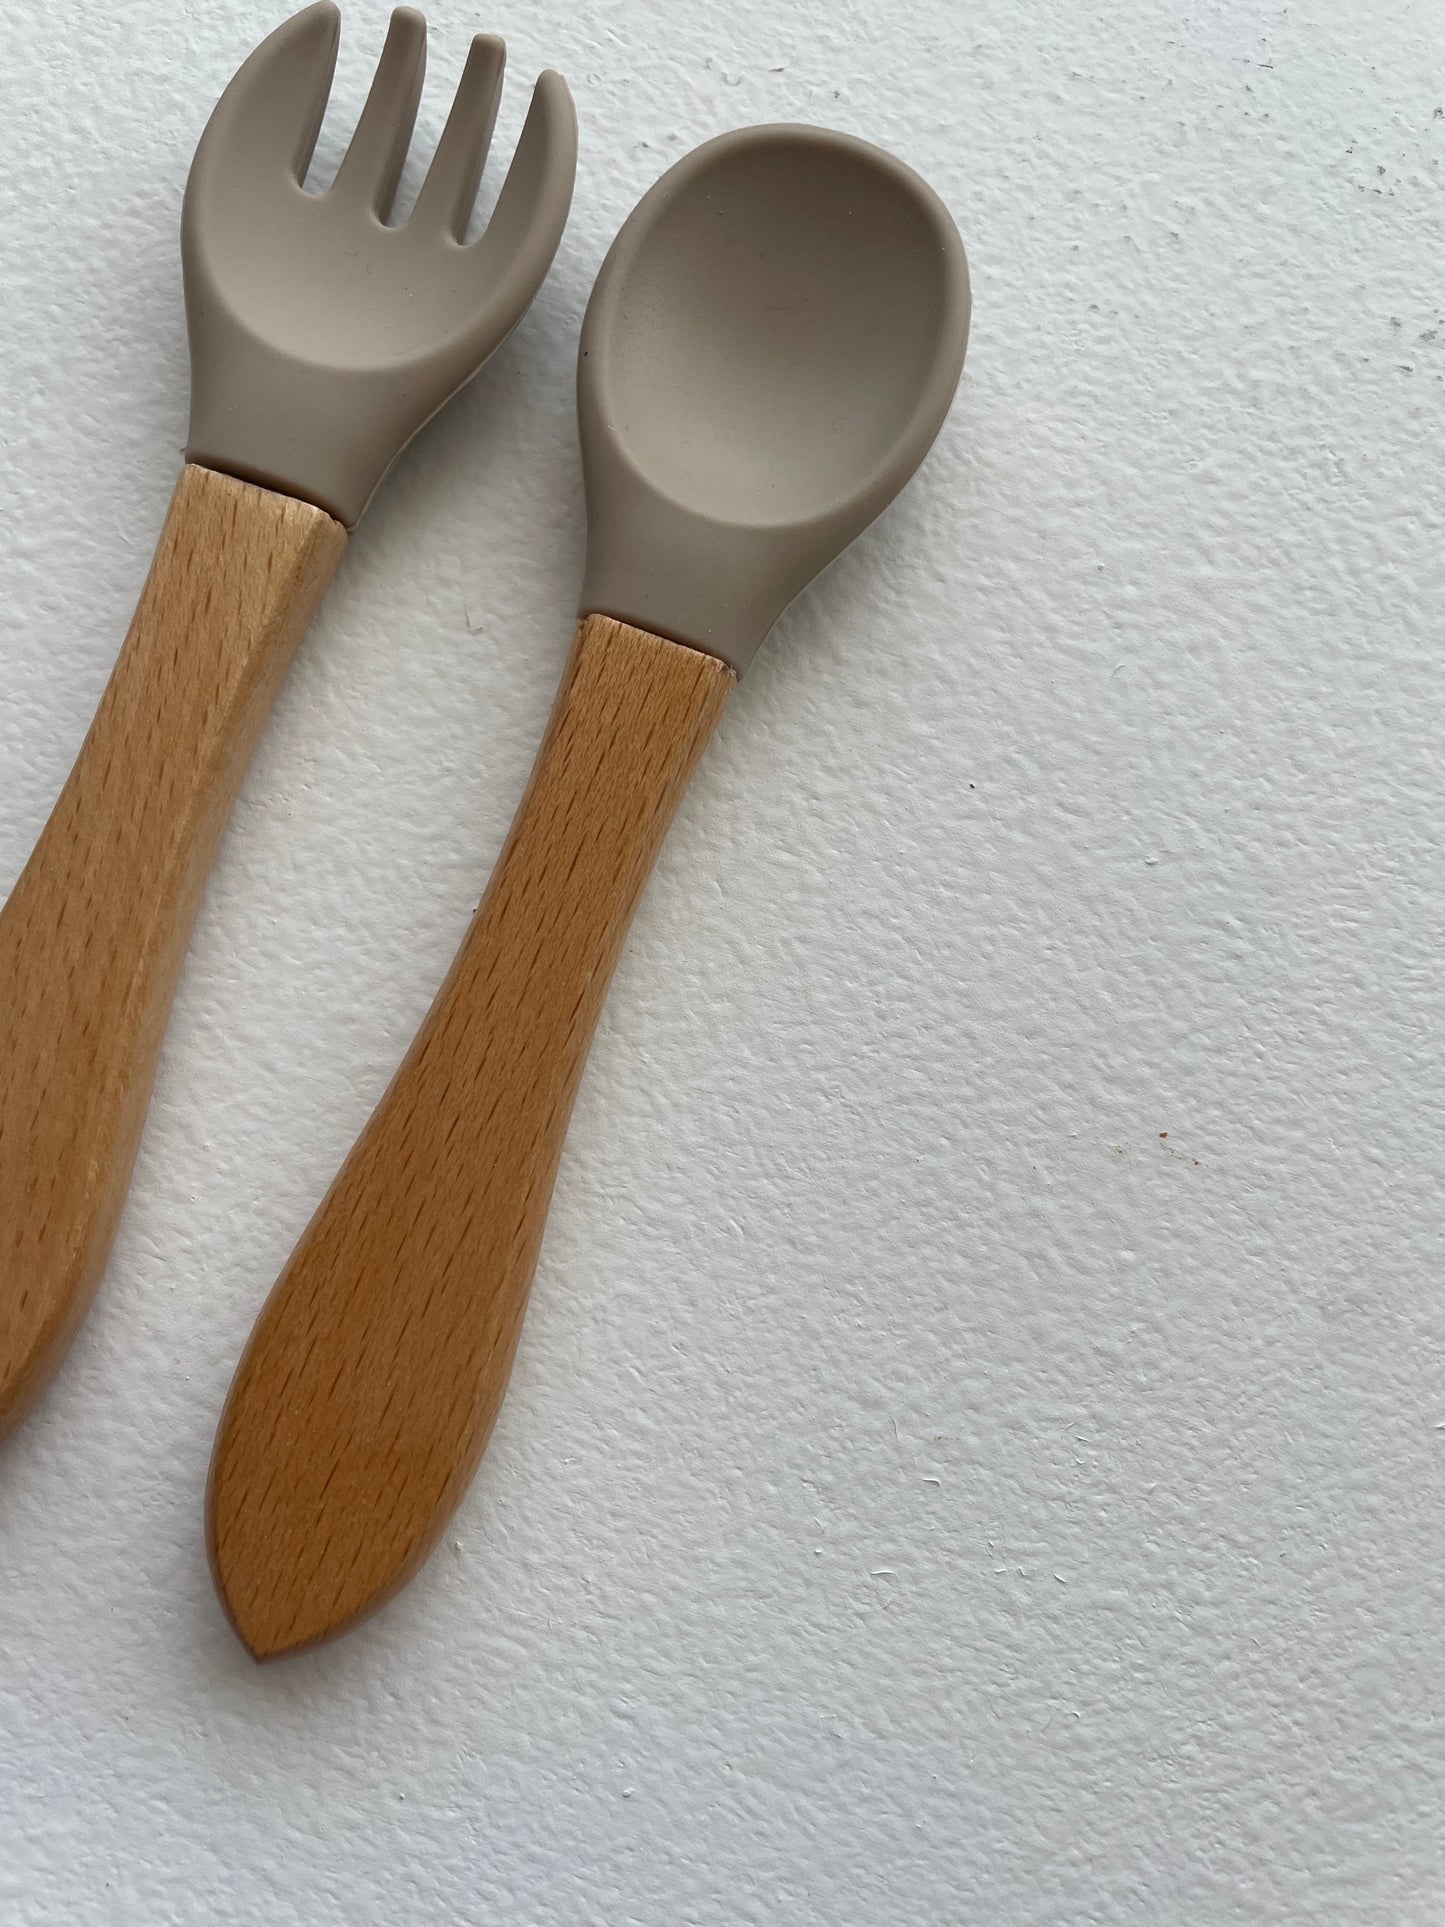 The Spoon & Fork Set